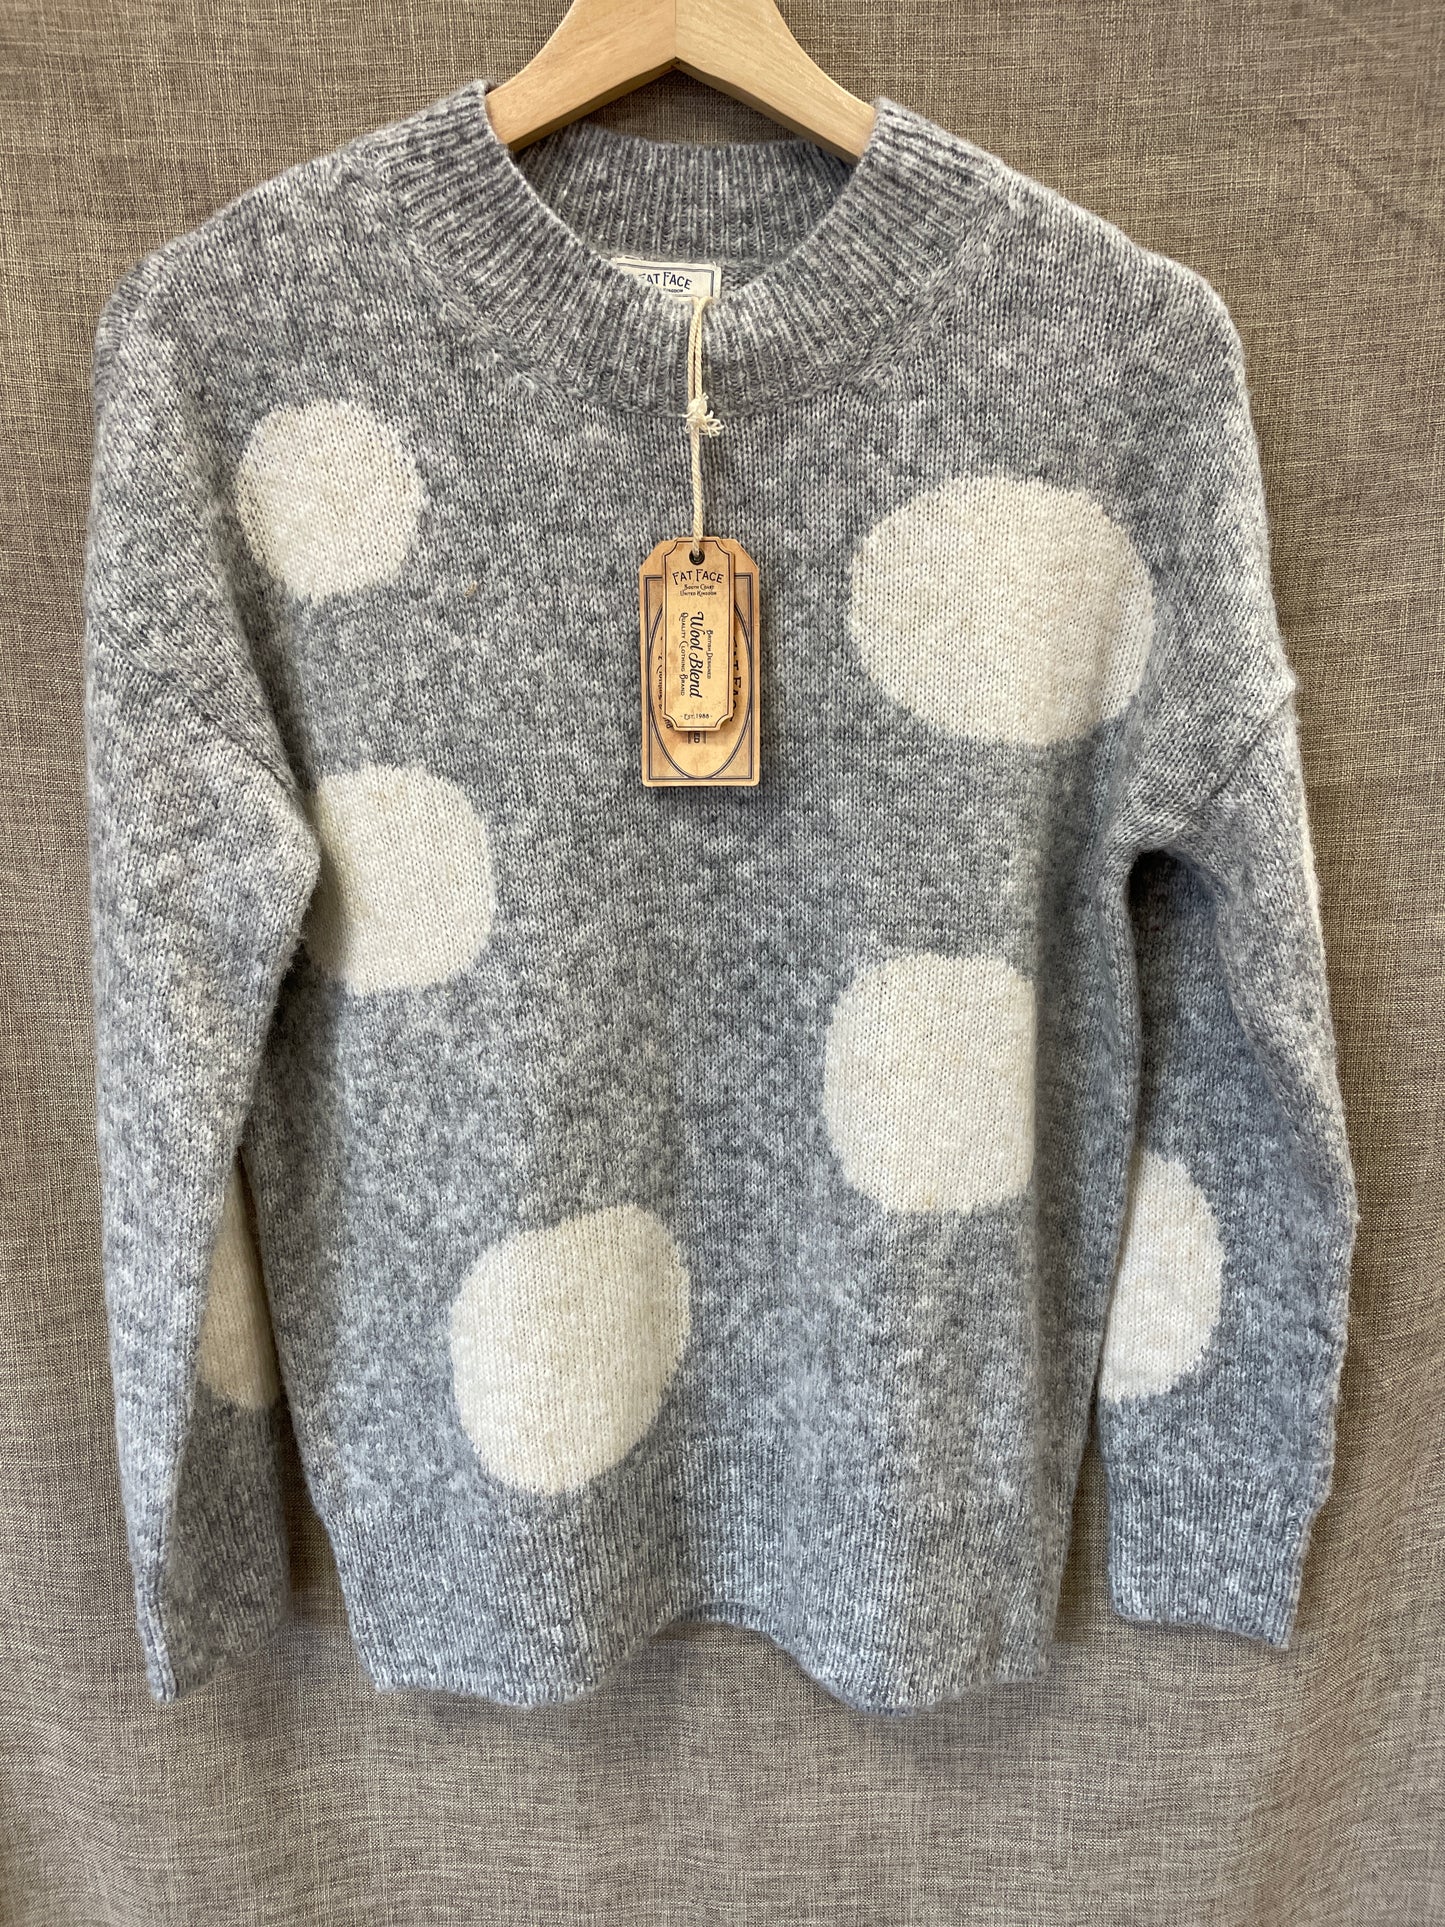 Fat Face New with Tags Grey with Cream Spots Wool Blend Crew Neck Long Sleeve Sweater Jumper Size 6